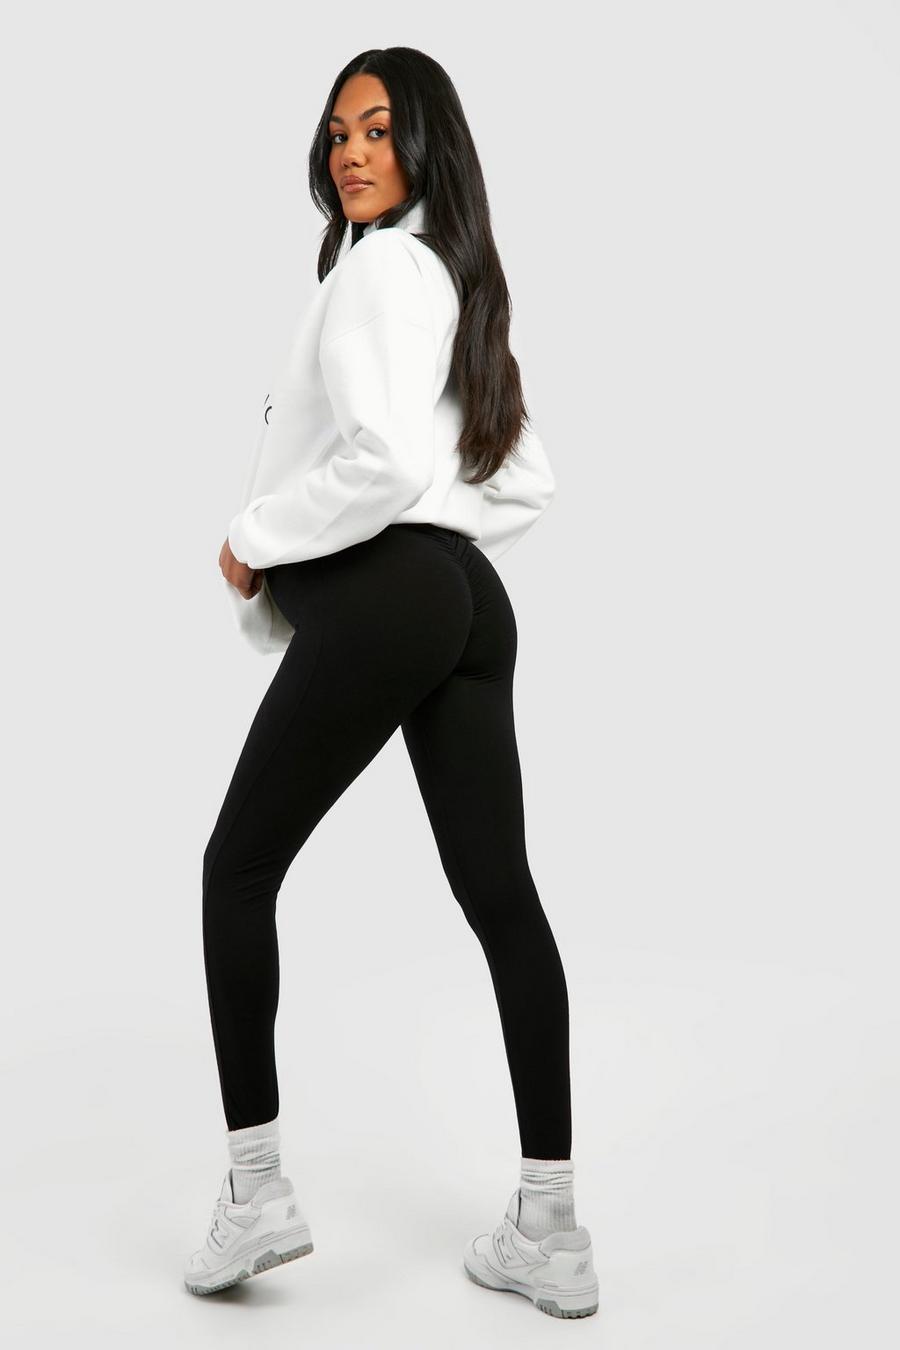 Maternity Leather Look Over Bump Leggings